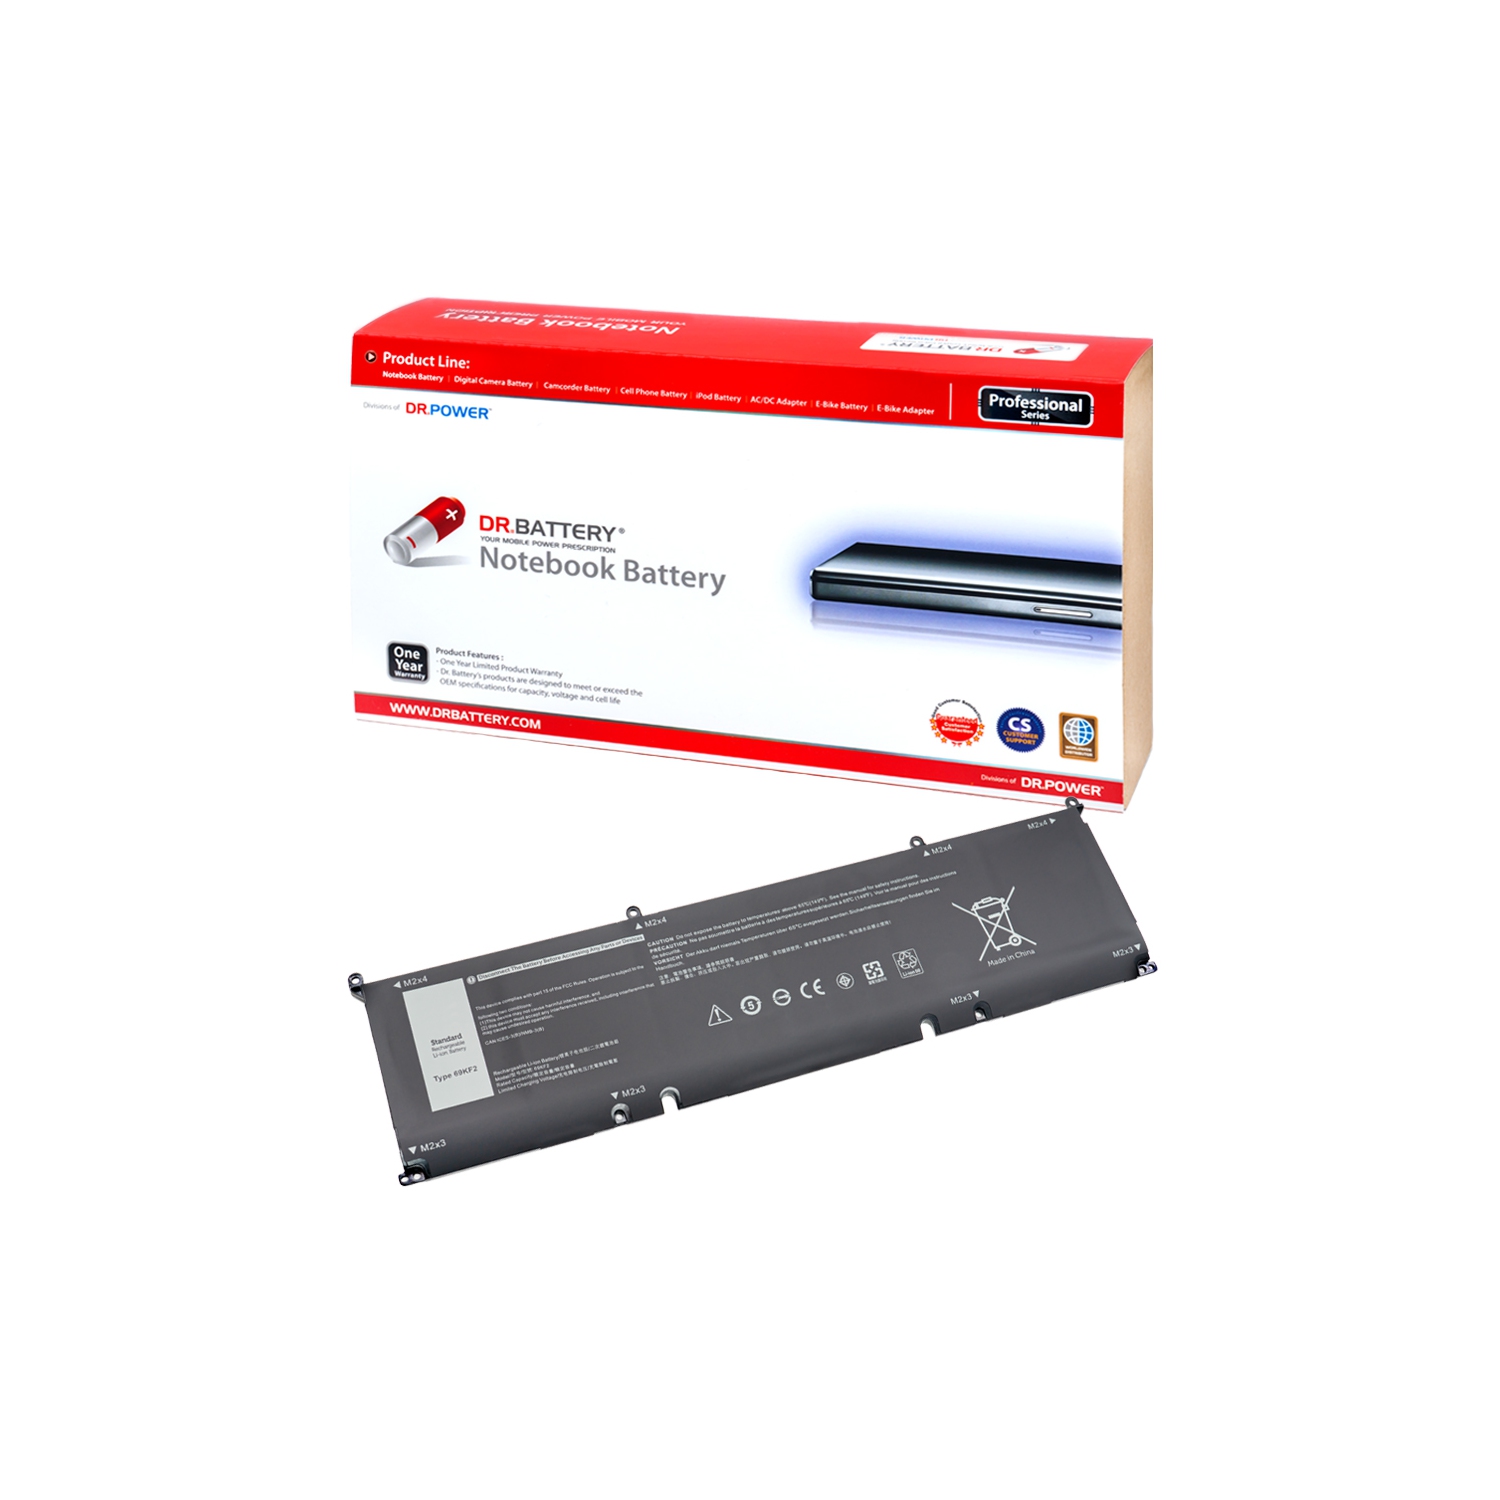 DR. BATTERY - Replacement for Dell Alienware M15 2020 M15 R3 P87F / M15 R4 / M17 2020 / M17 R3 P45E / 69KF2 / 70N2F / M59JH [11.4V / 7545mAh / 86Wh] ***Free Shipping***